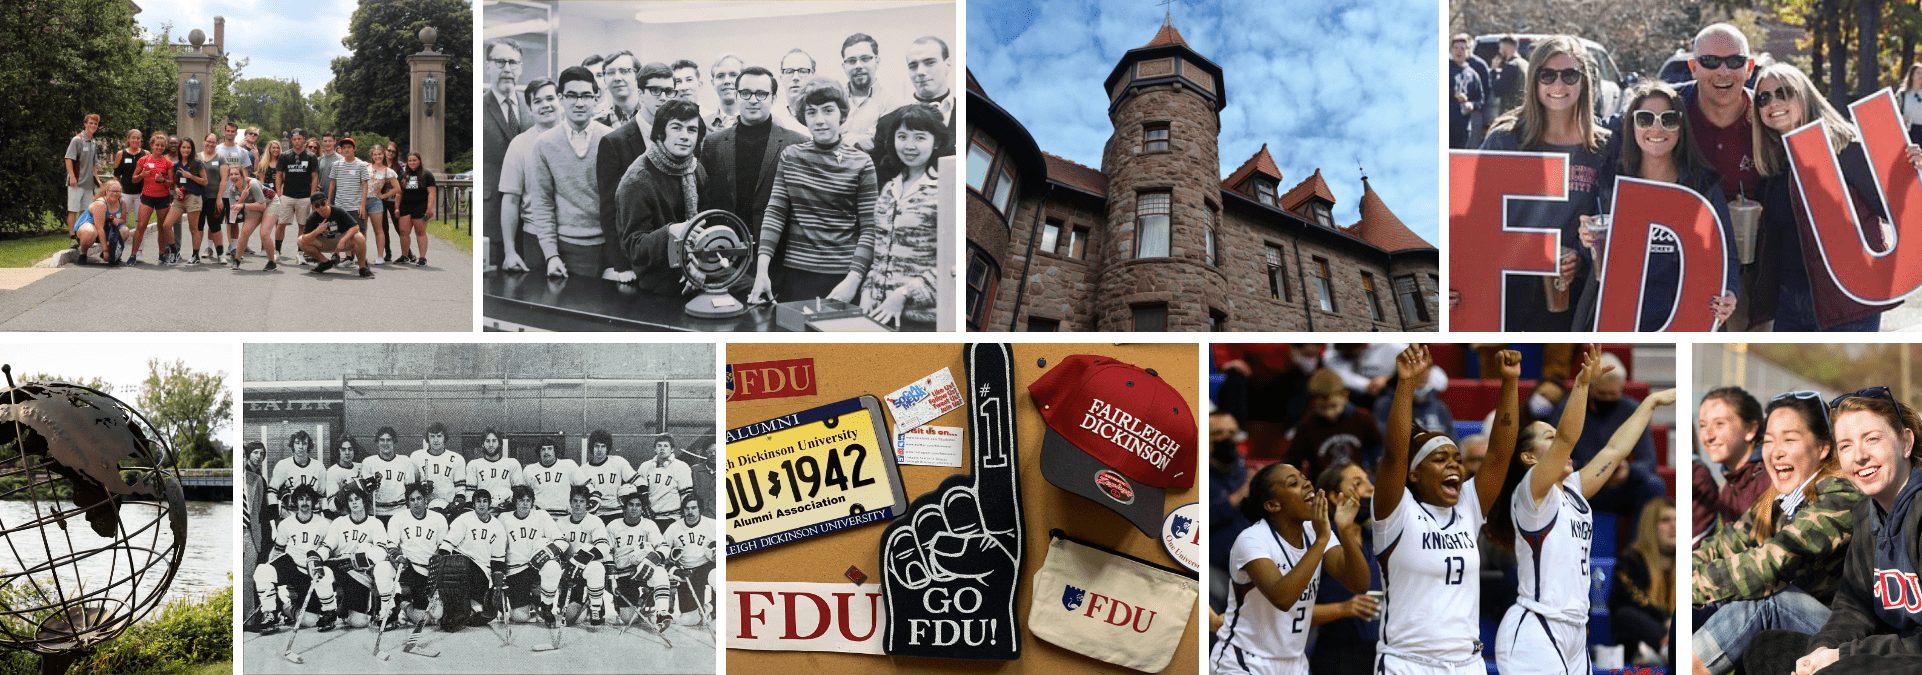 A collage of images showing student life at FDU.